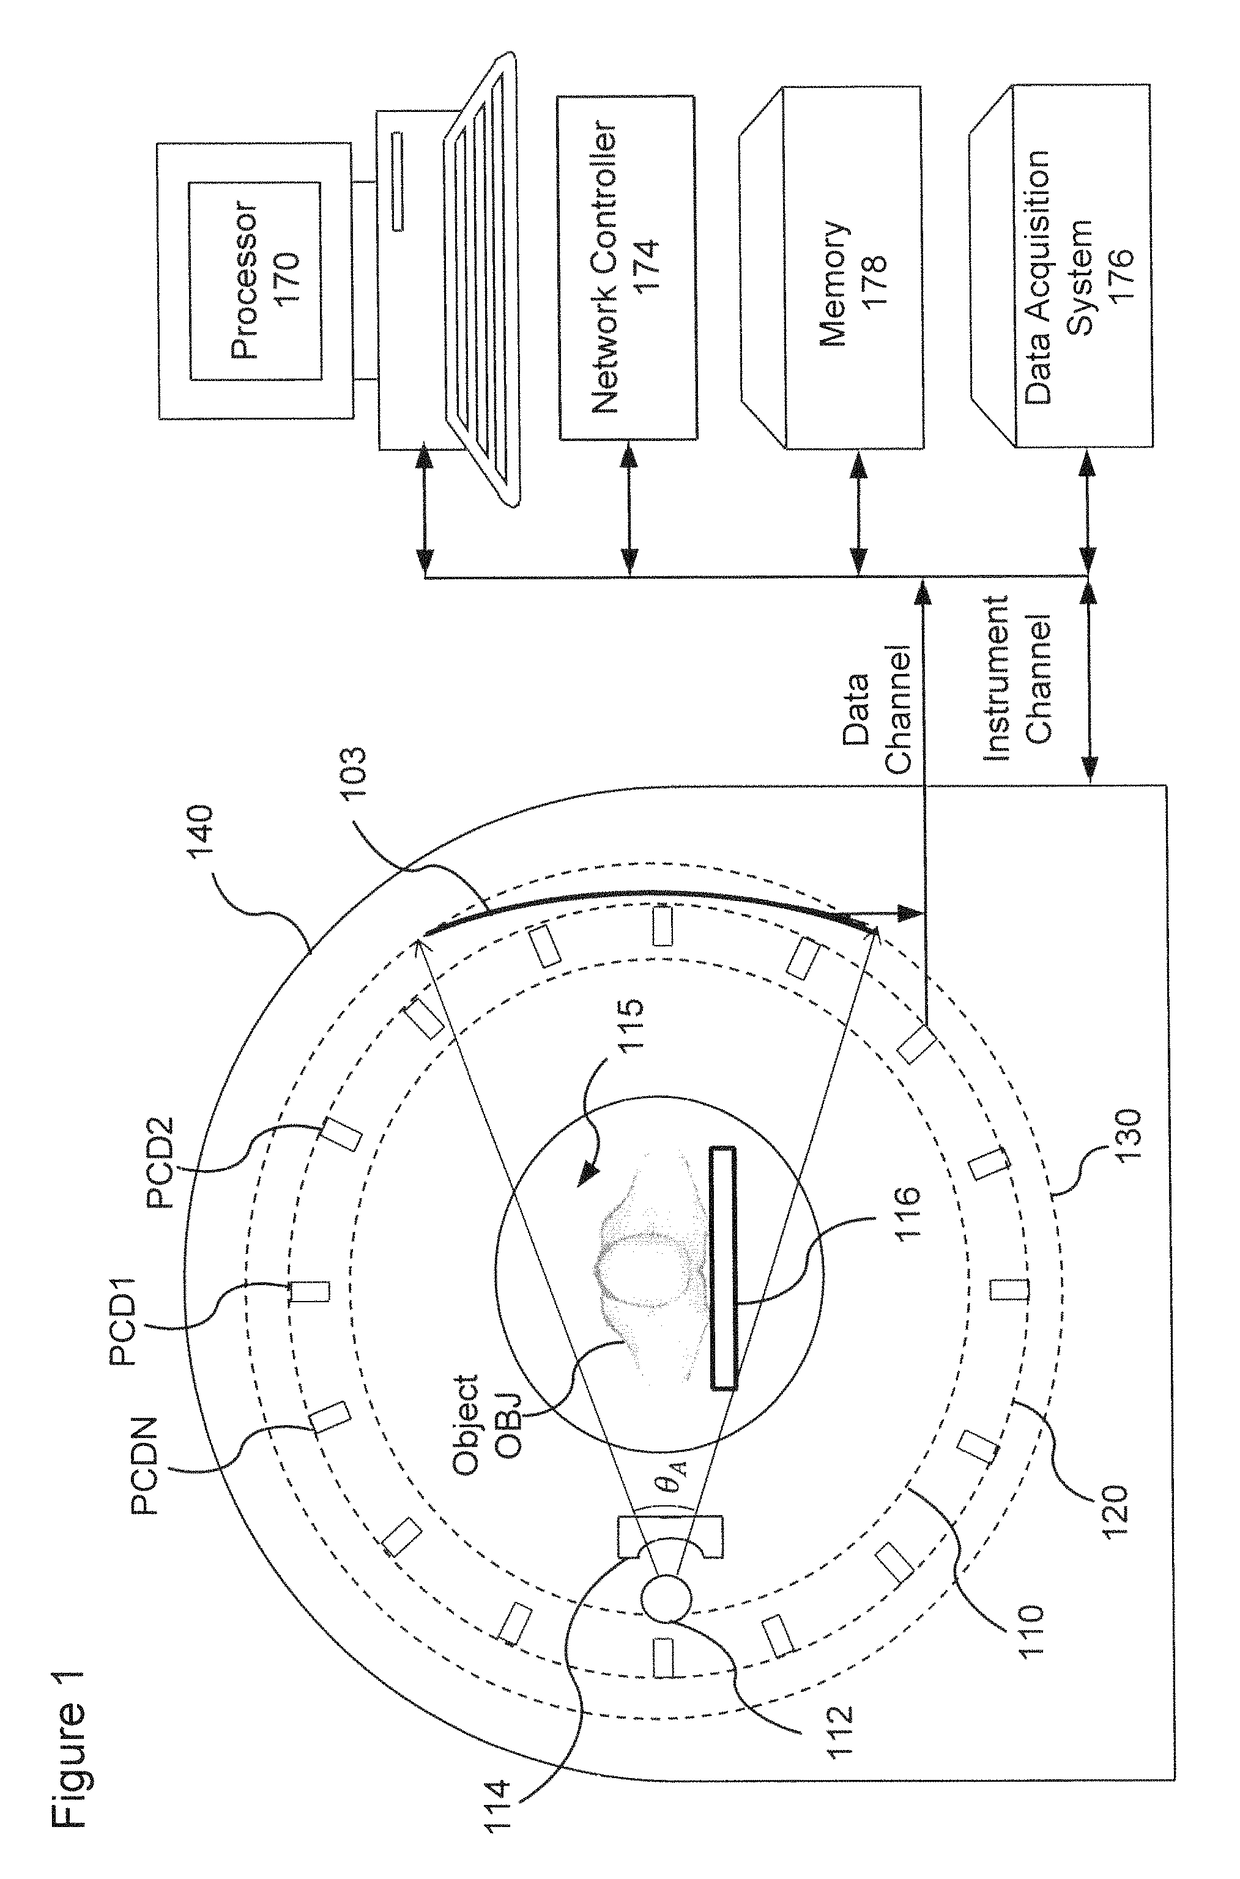 More efficient method and apparatus for detector response correction and material decomposition of projection data obtained using photon-counting detectors